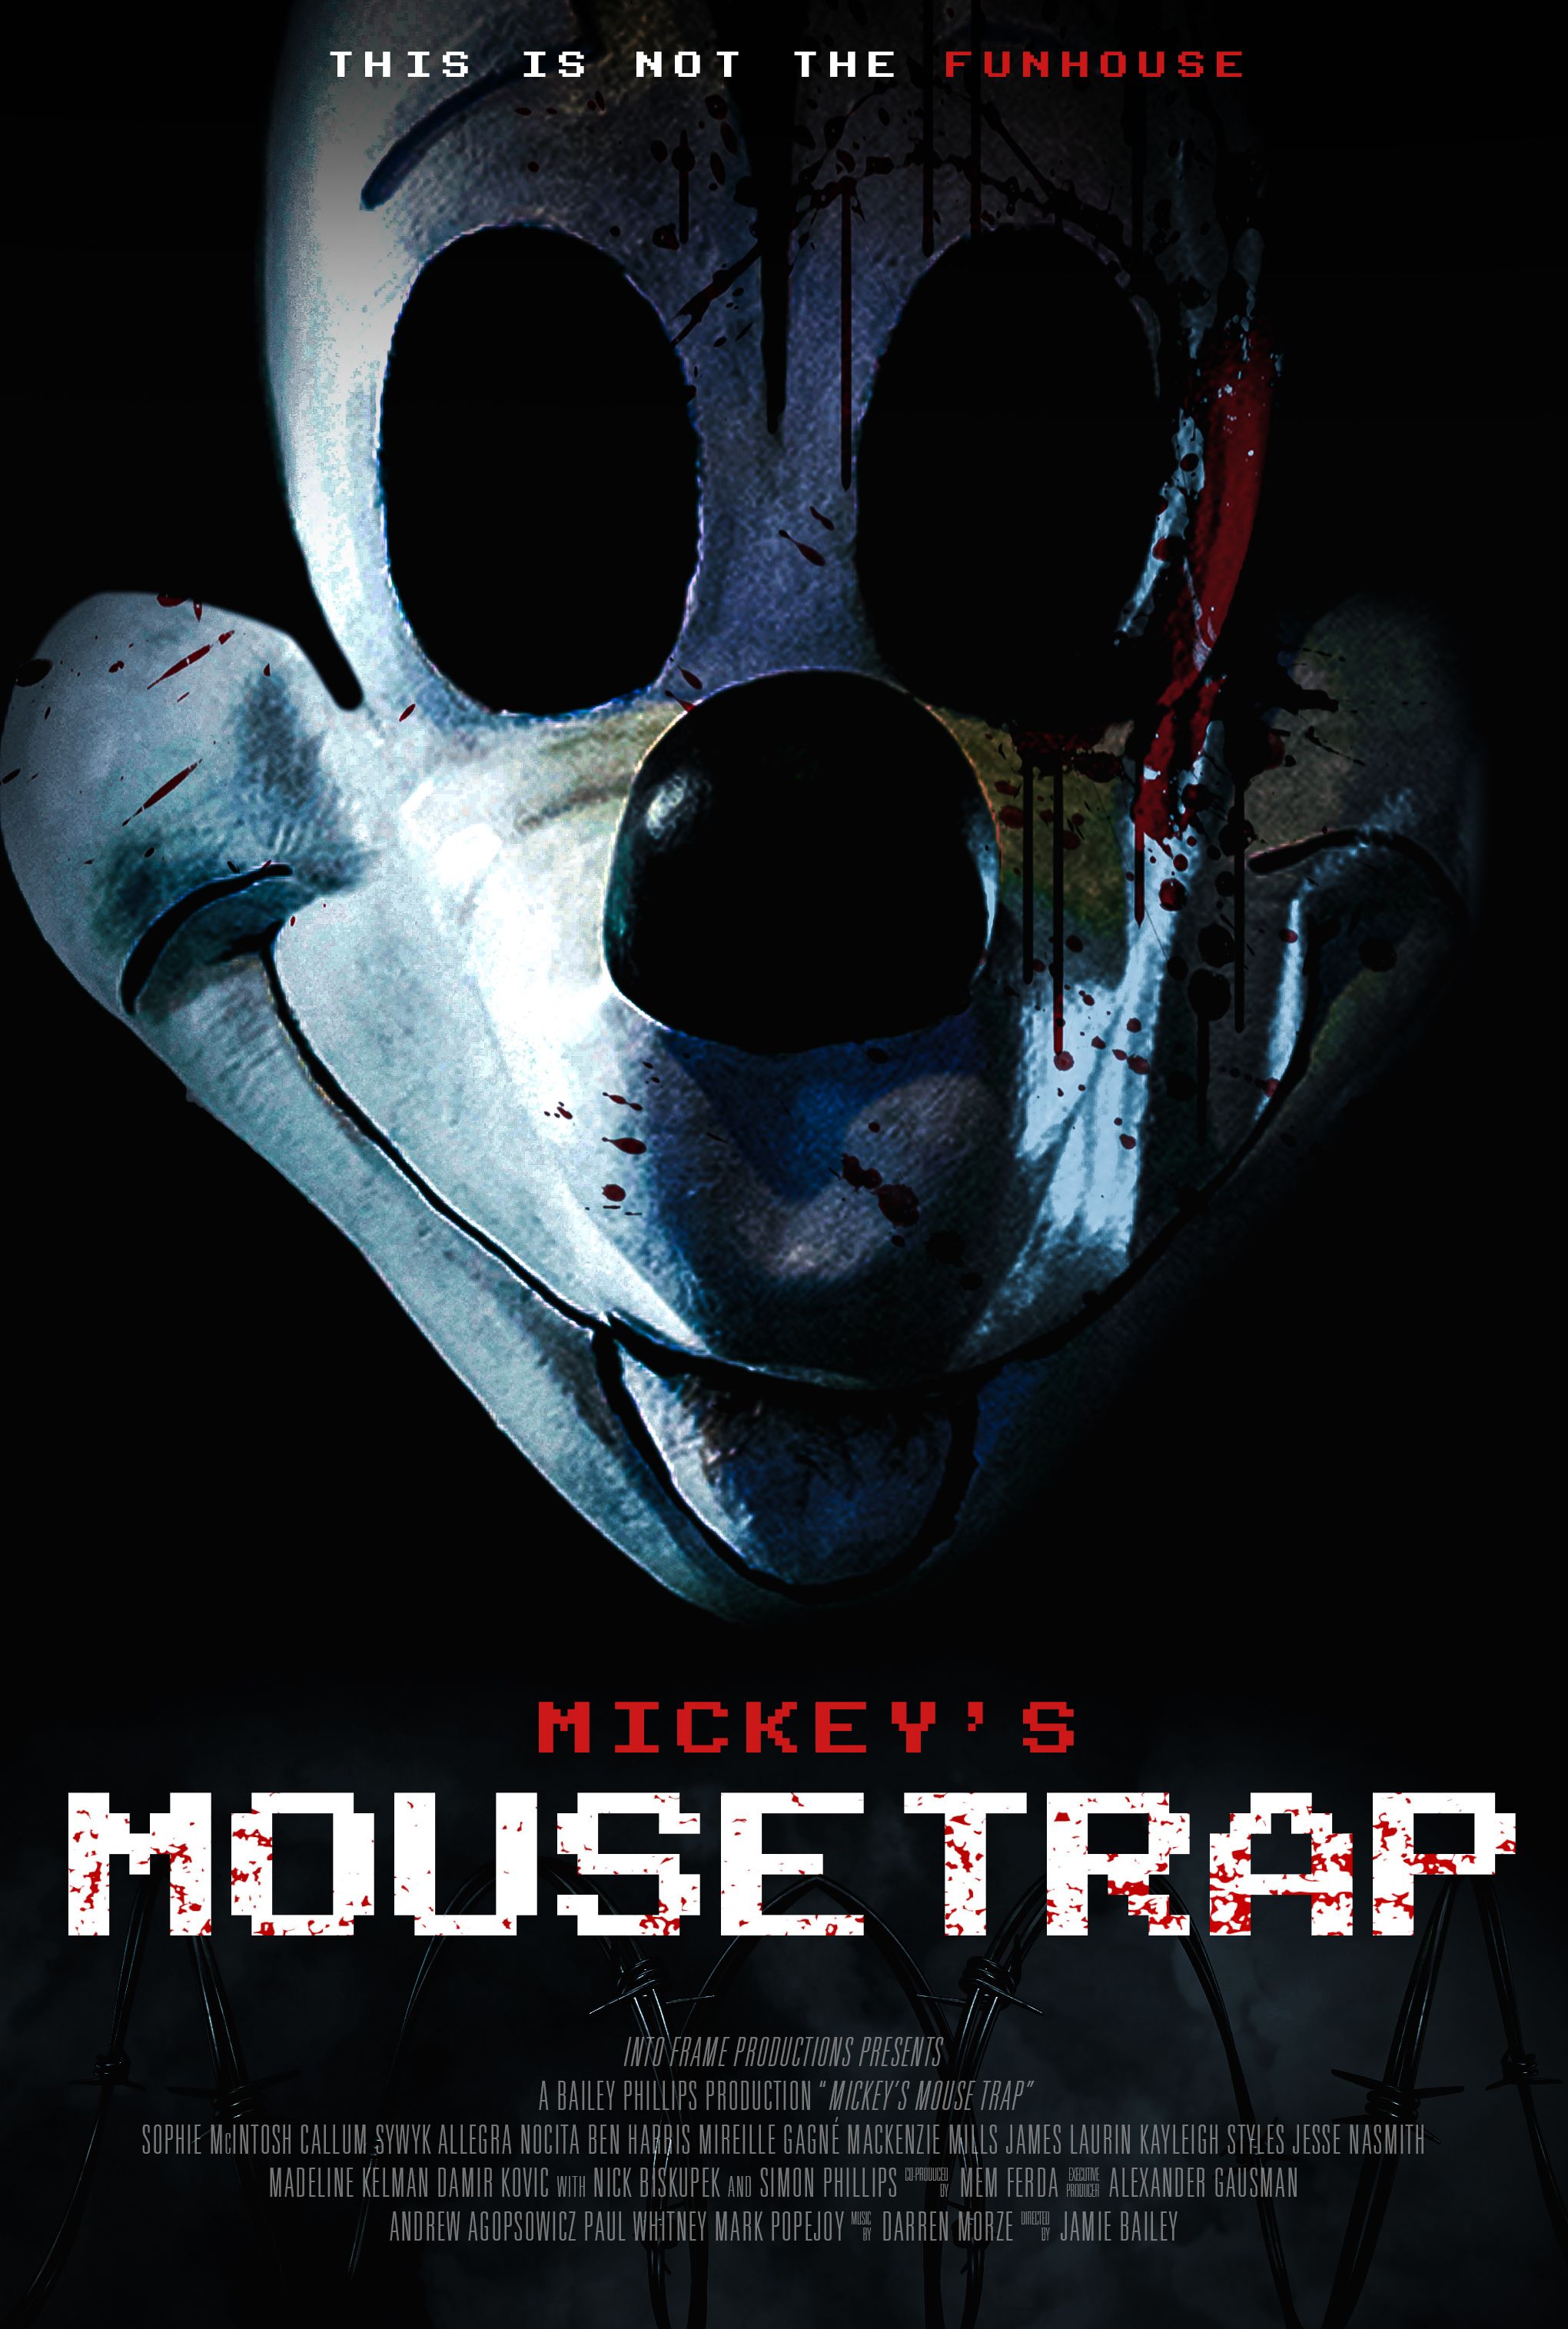 The poster for Mickey's Mouse Trap